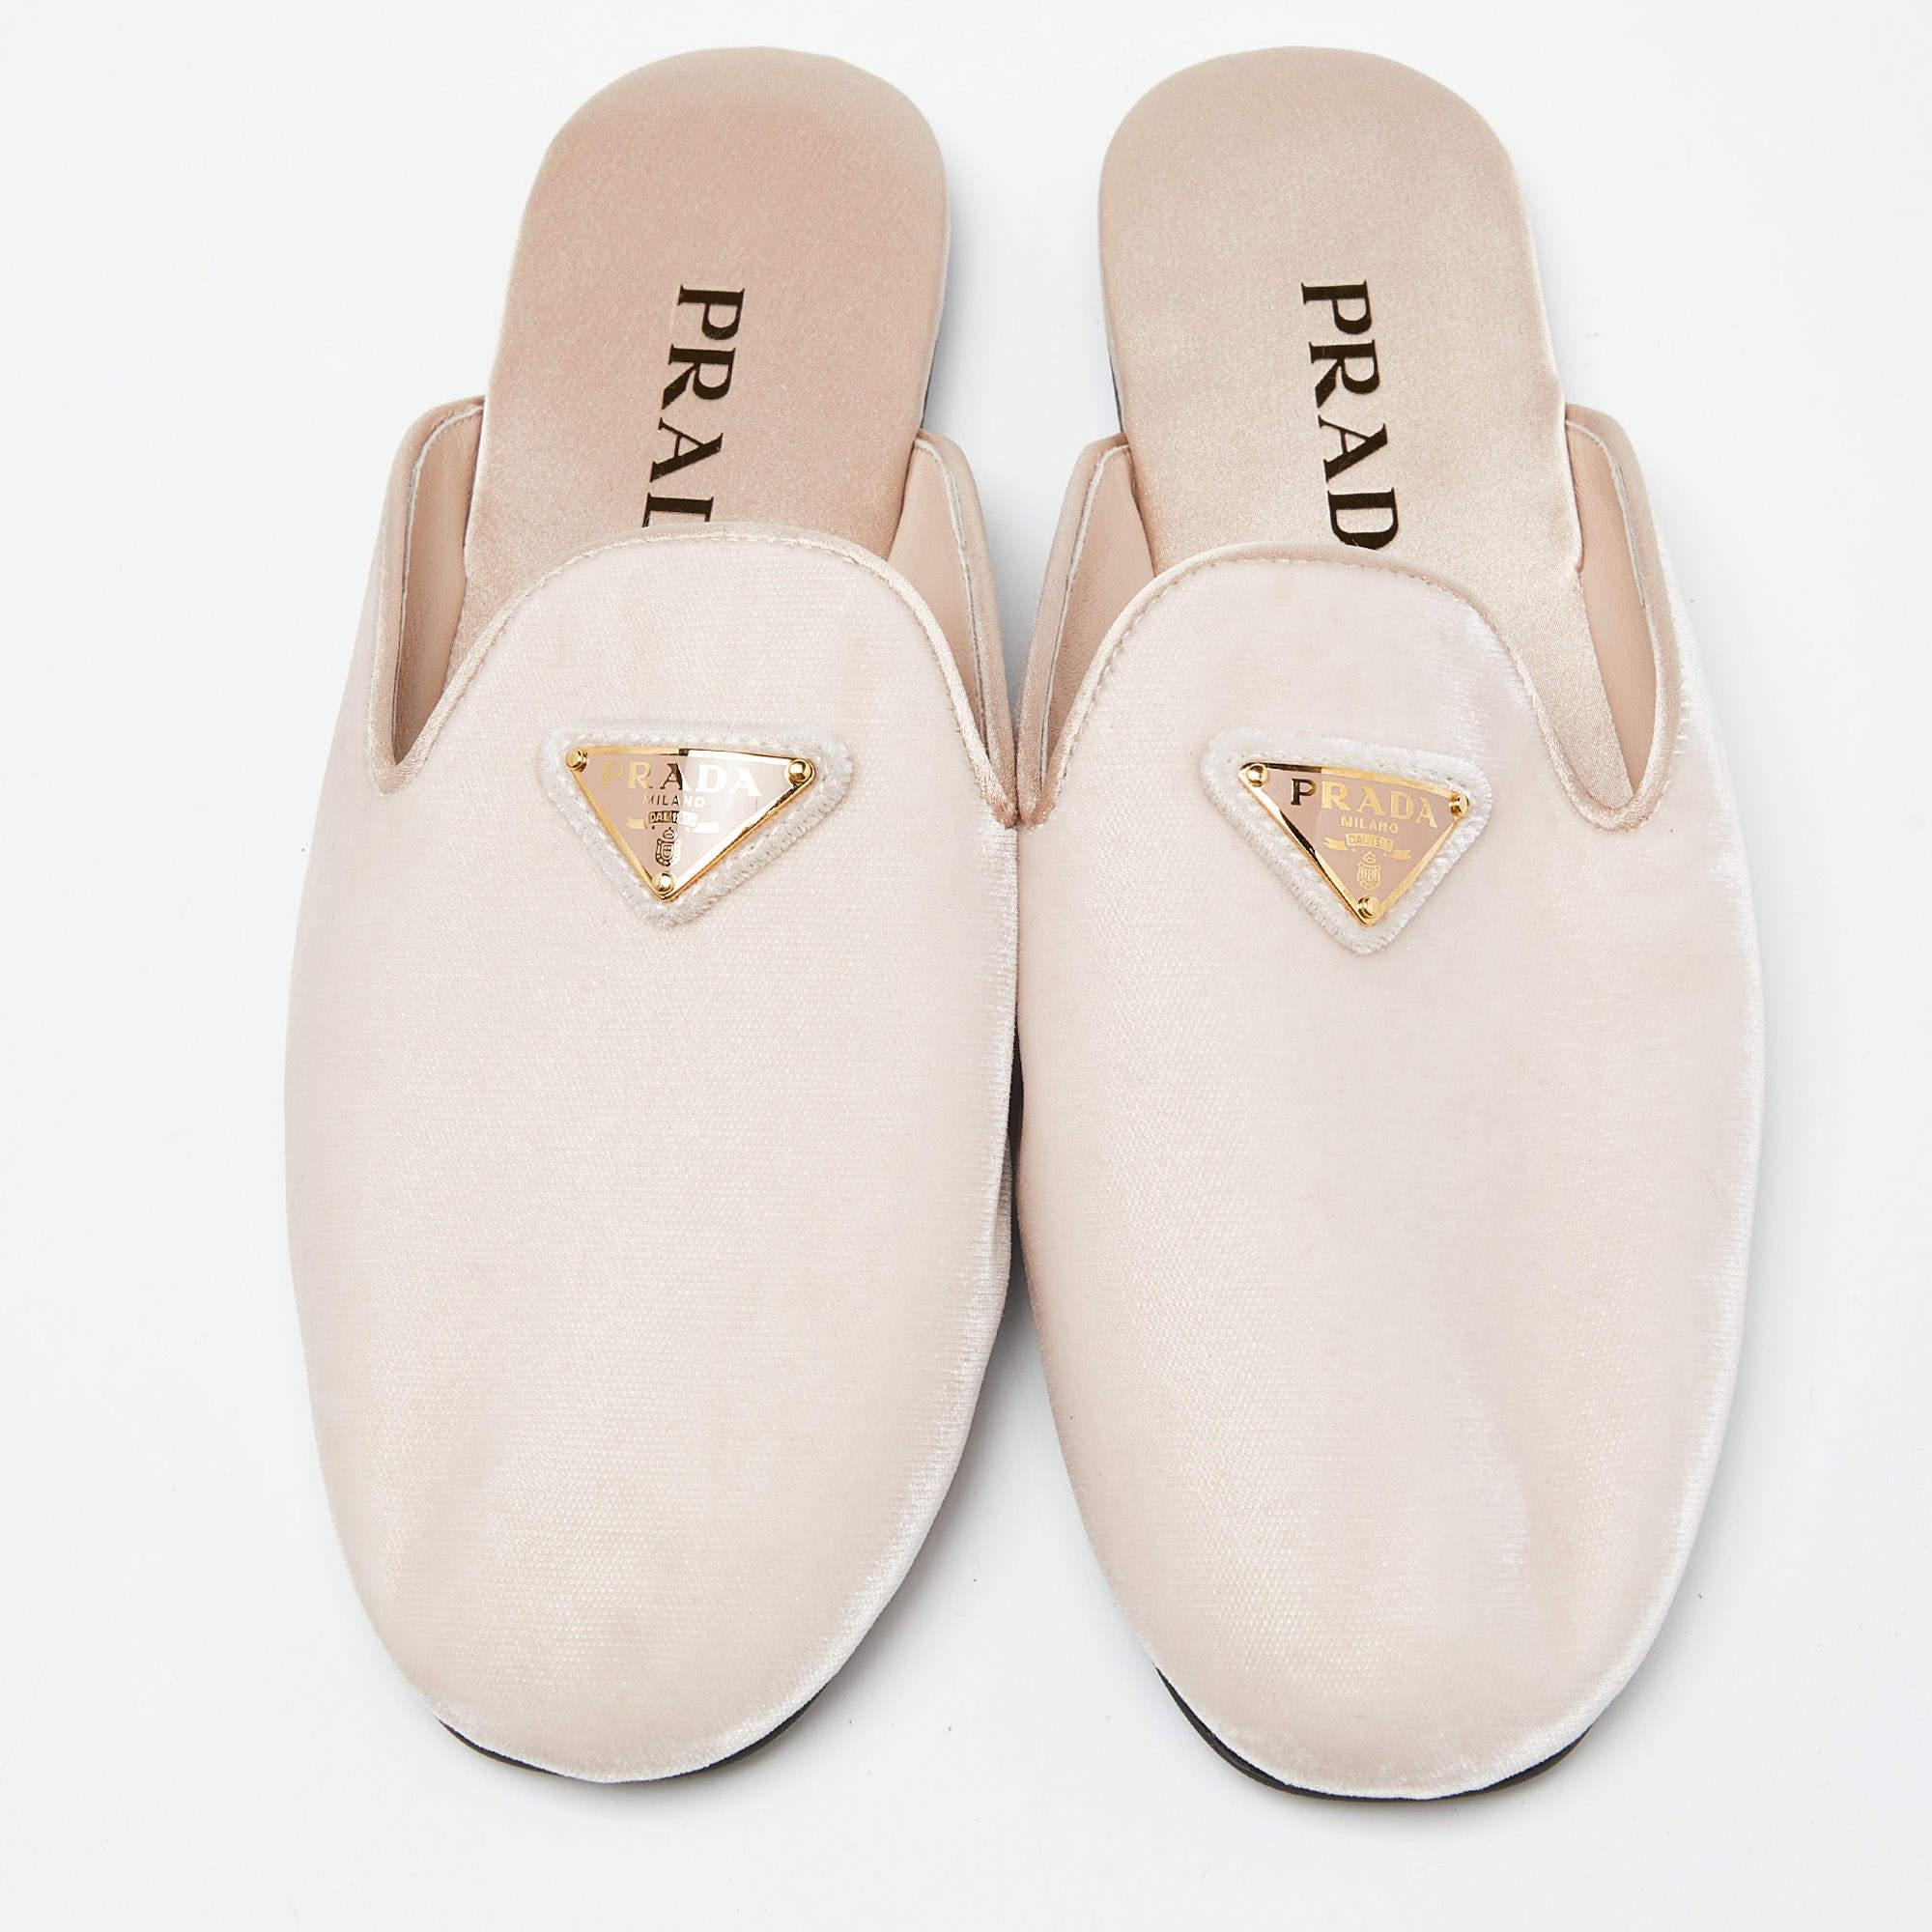 Create effortless styles with these Prada flat mules. Made of quality materials, they are designed to elevate your OOTD and keep you in comfort all day long.

